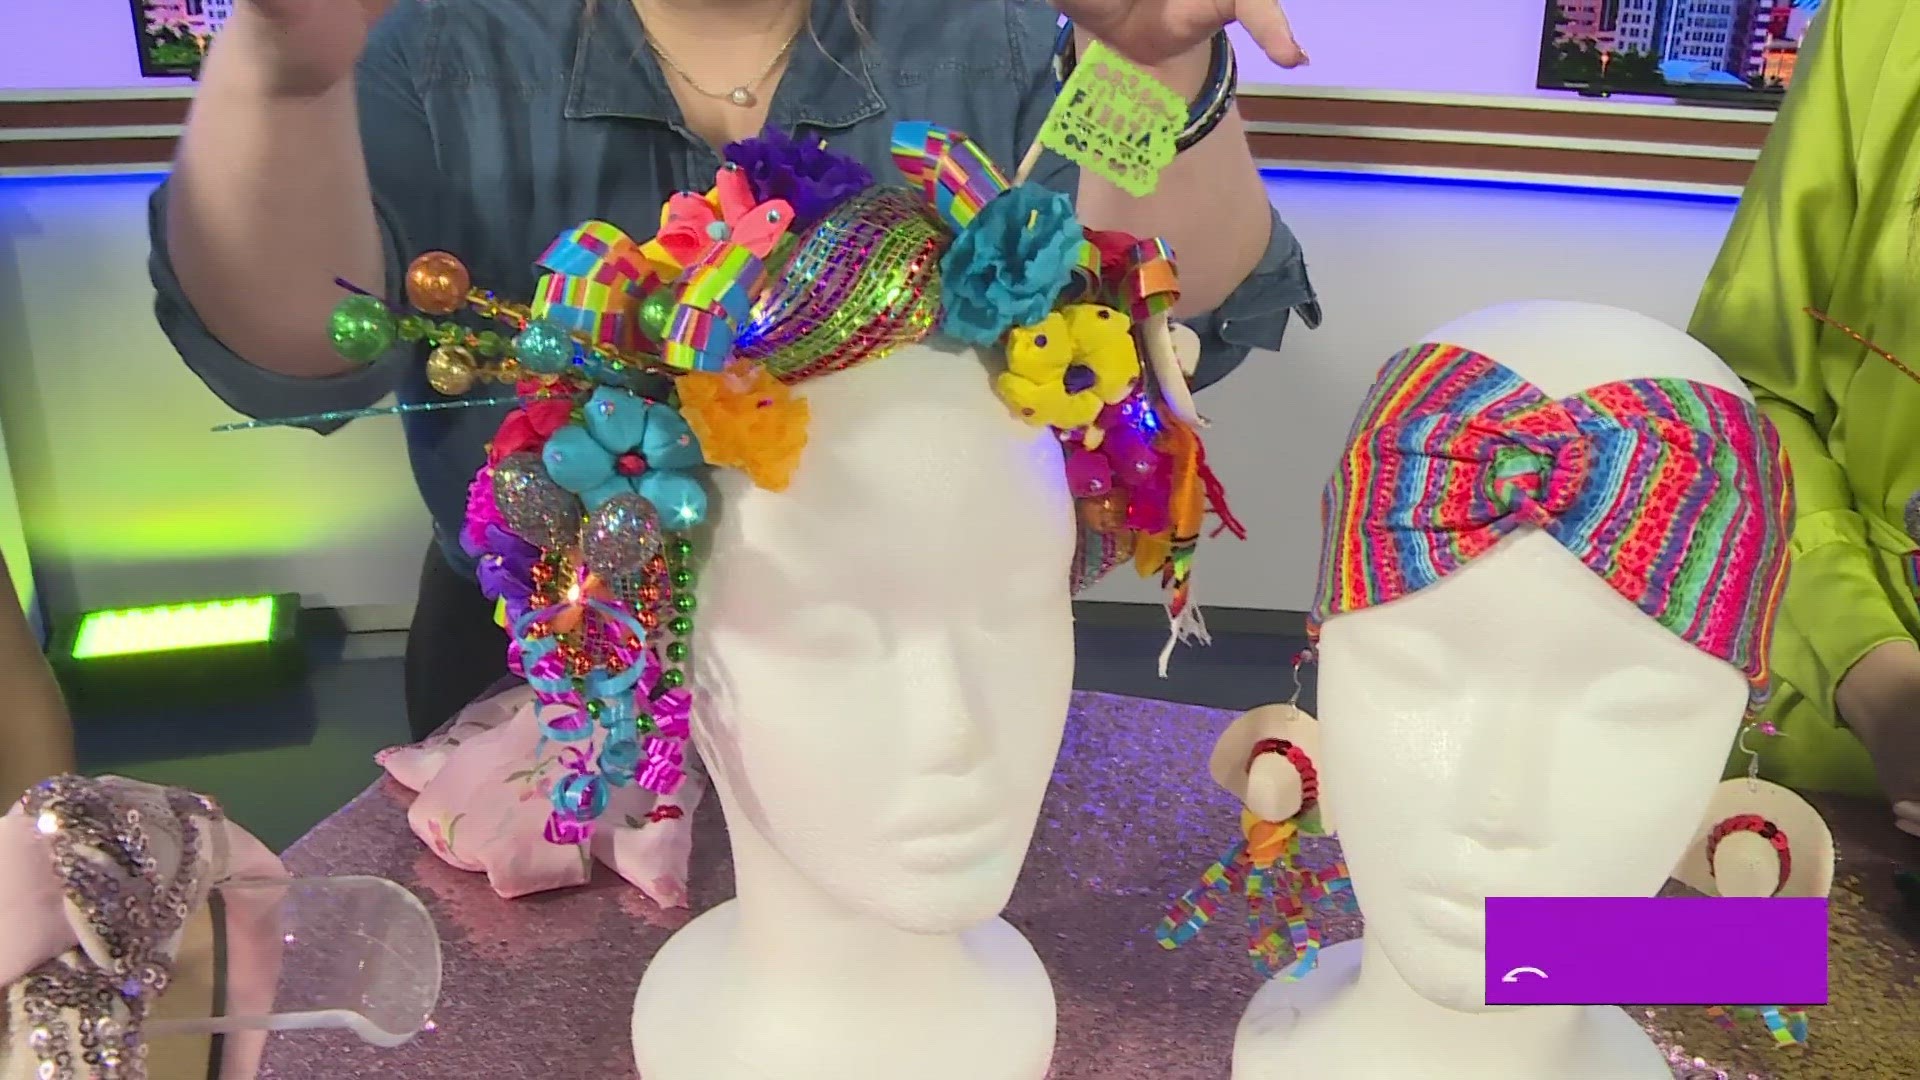 Caroline Lopez with Love You, Madly Boutique shares her Fiesta-themed hairbands with Roma.